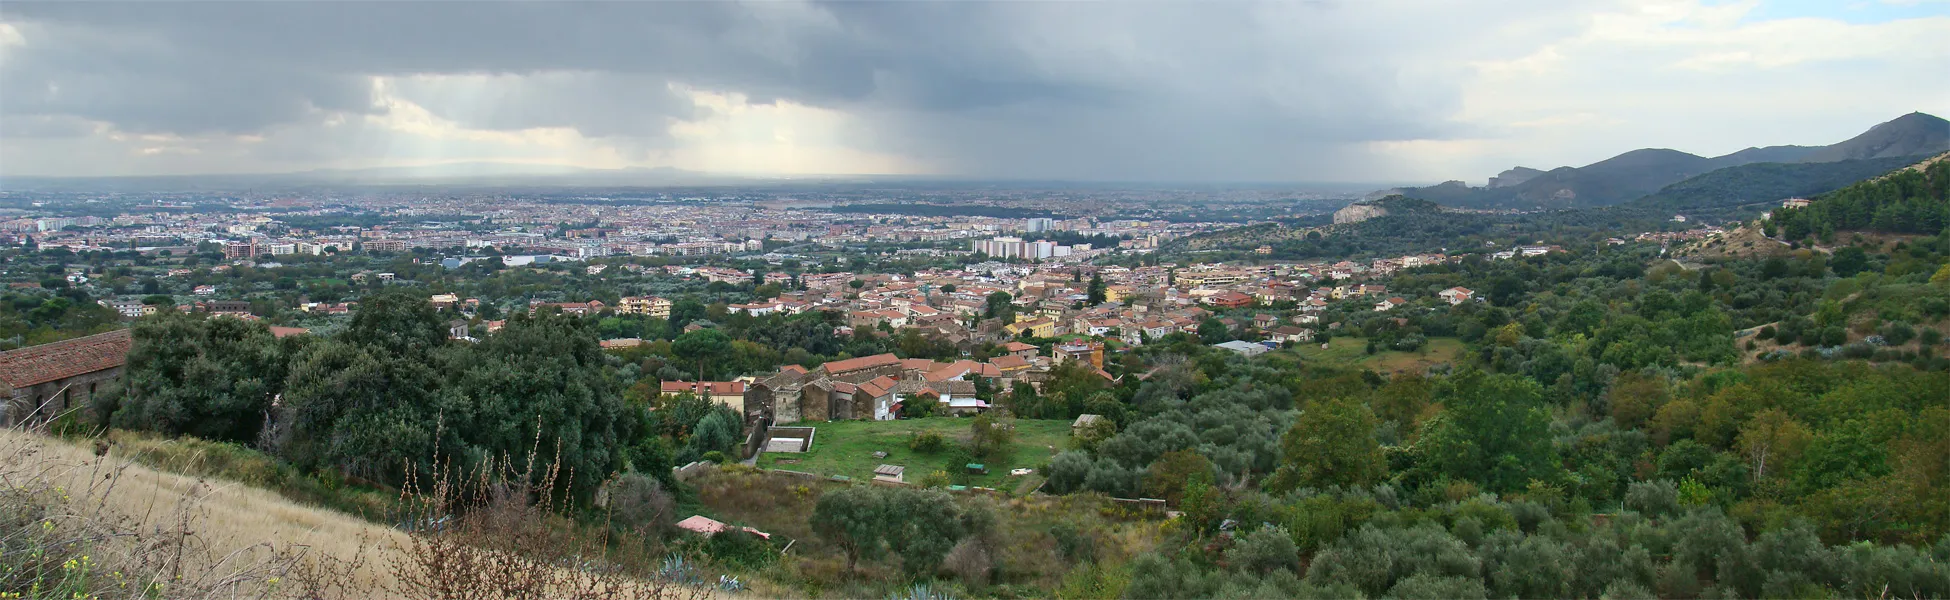 Photo showing: Caserta, Campania, Italy. Panoramic view from Casertavecchia.